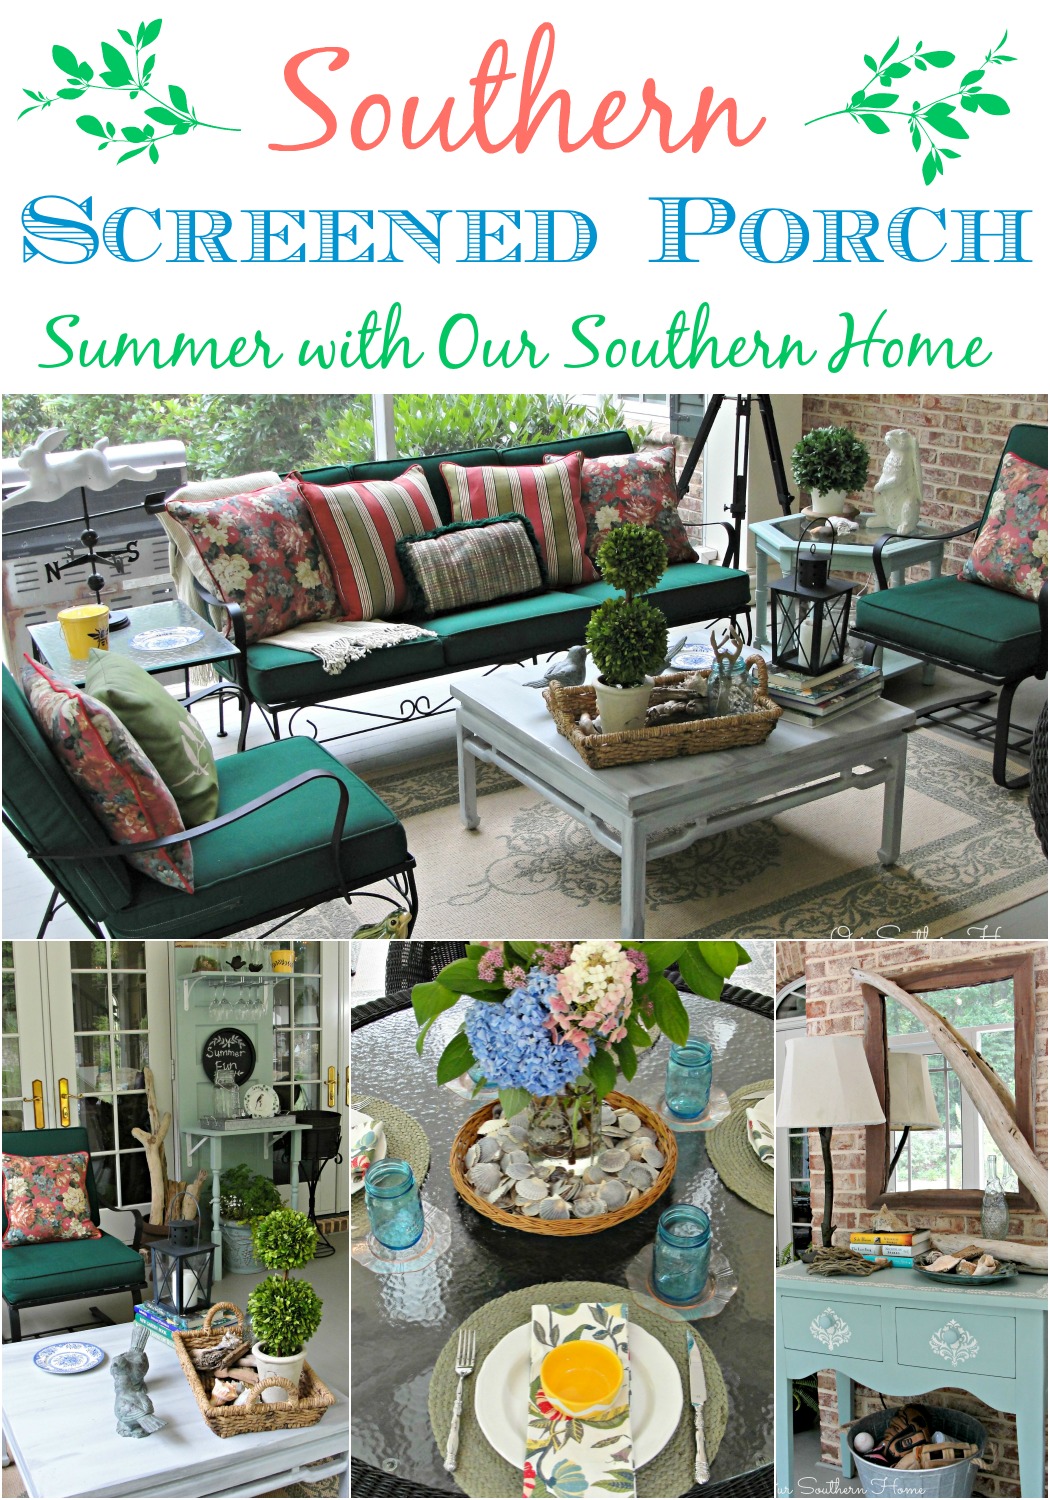 Summer on the Screened Porch